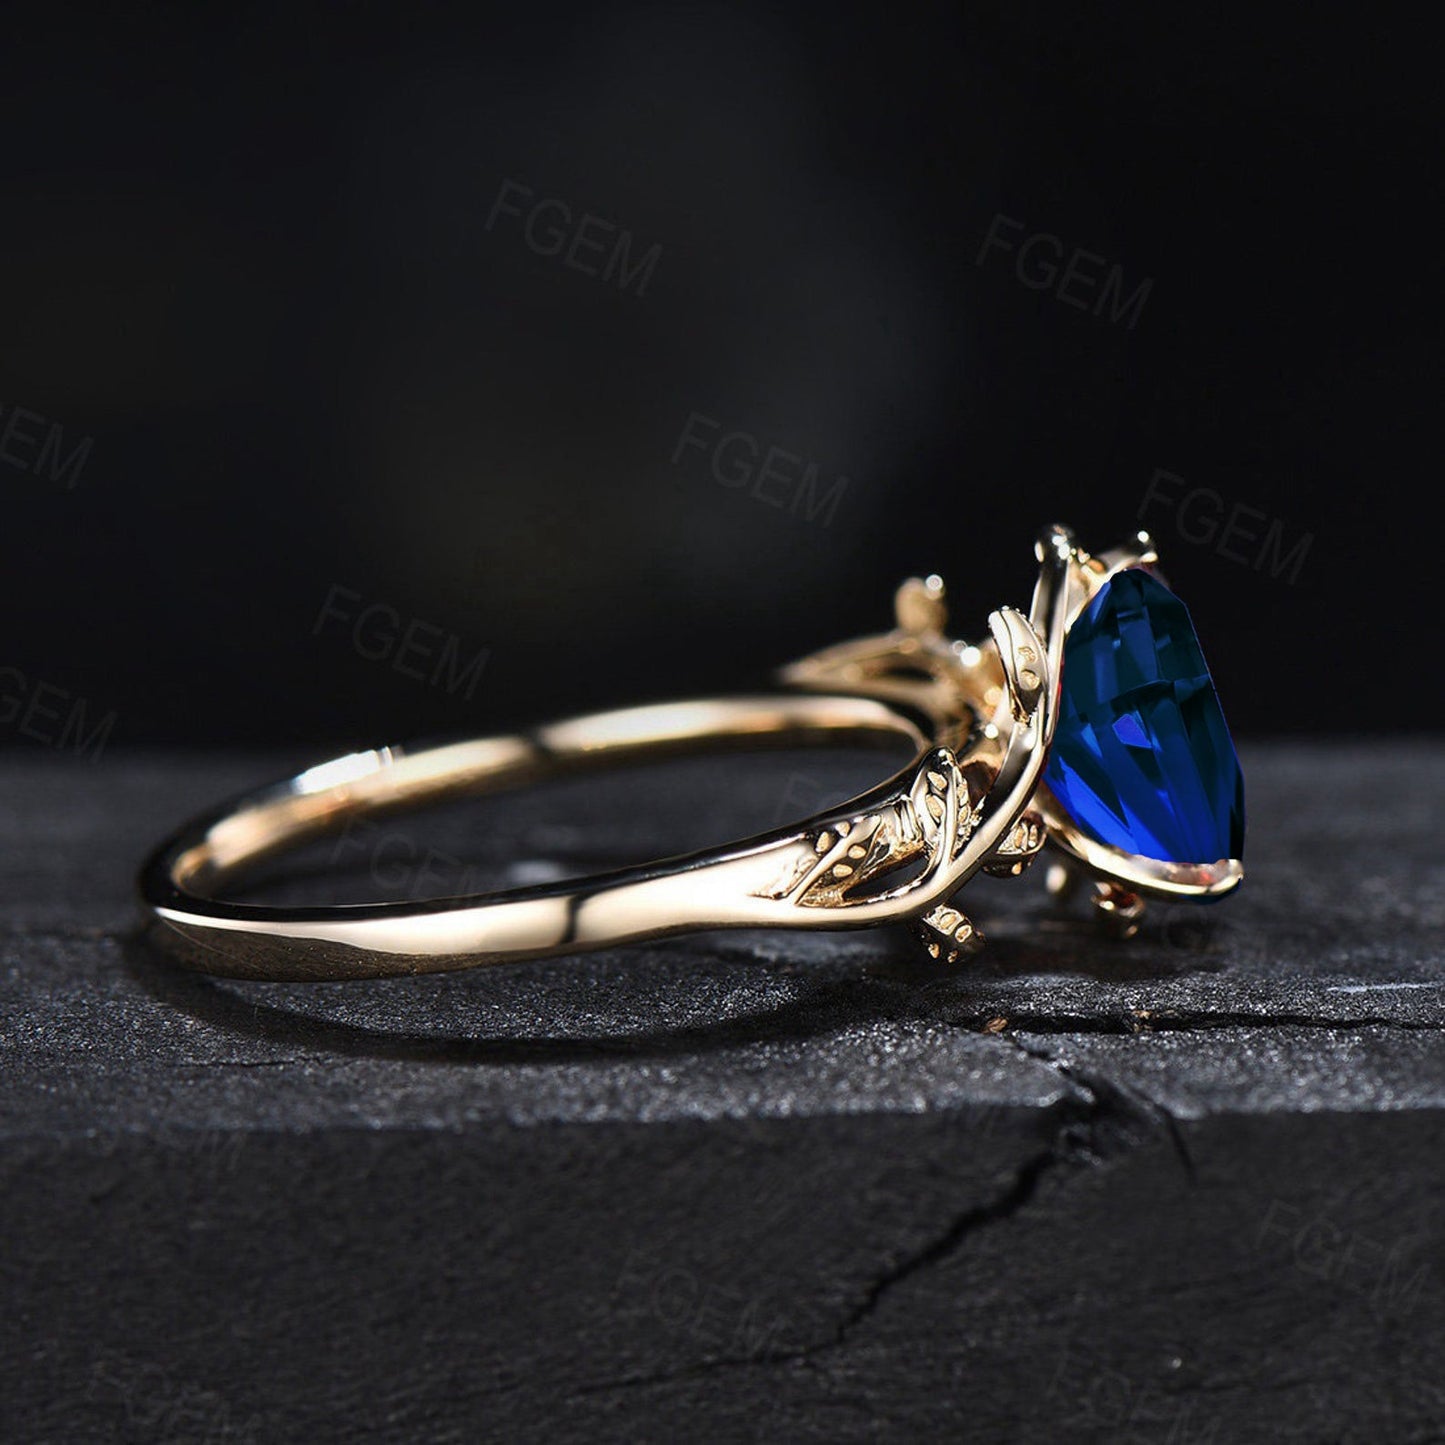 Yellow Gold Blue Sapphire Nature Engagement Ring Vintage 1.25ct Pear Blue Sapphire Wedding Ring September Birthstone Gemstone Jewelry Gifts